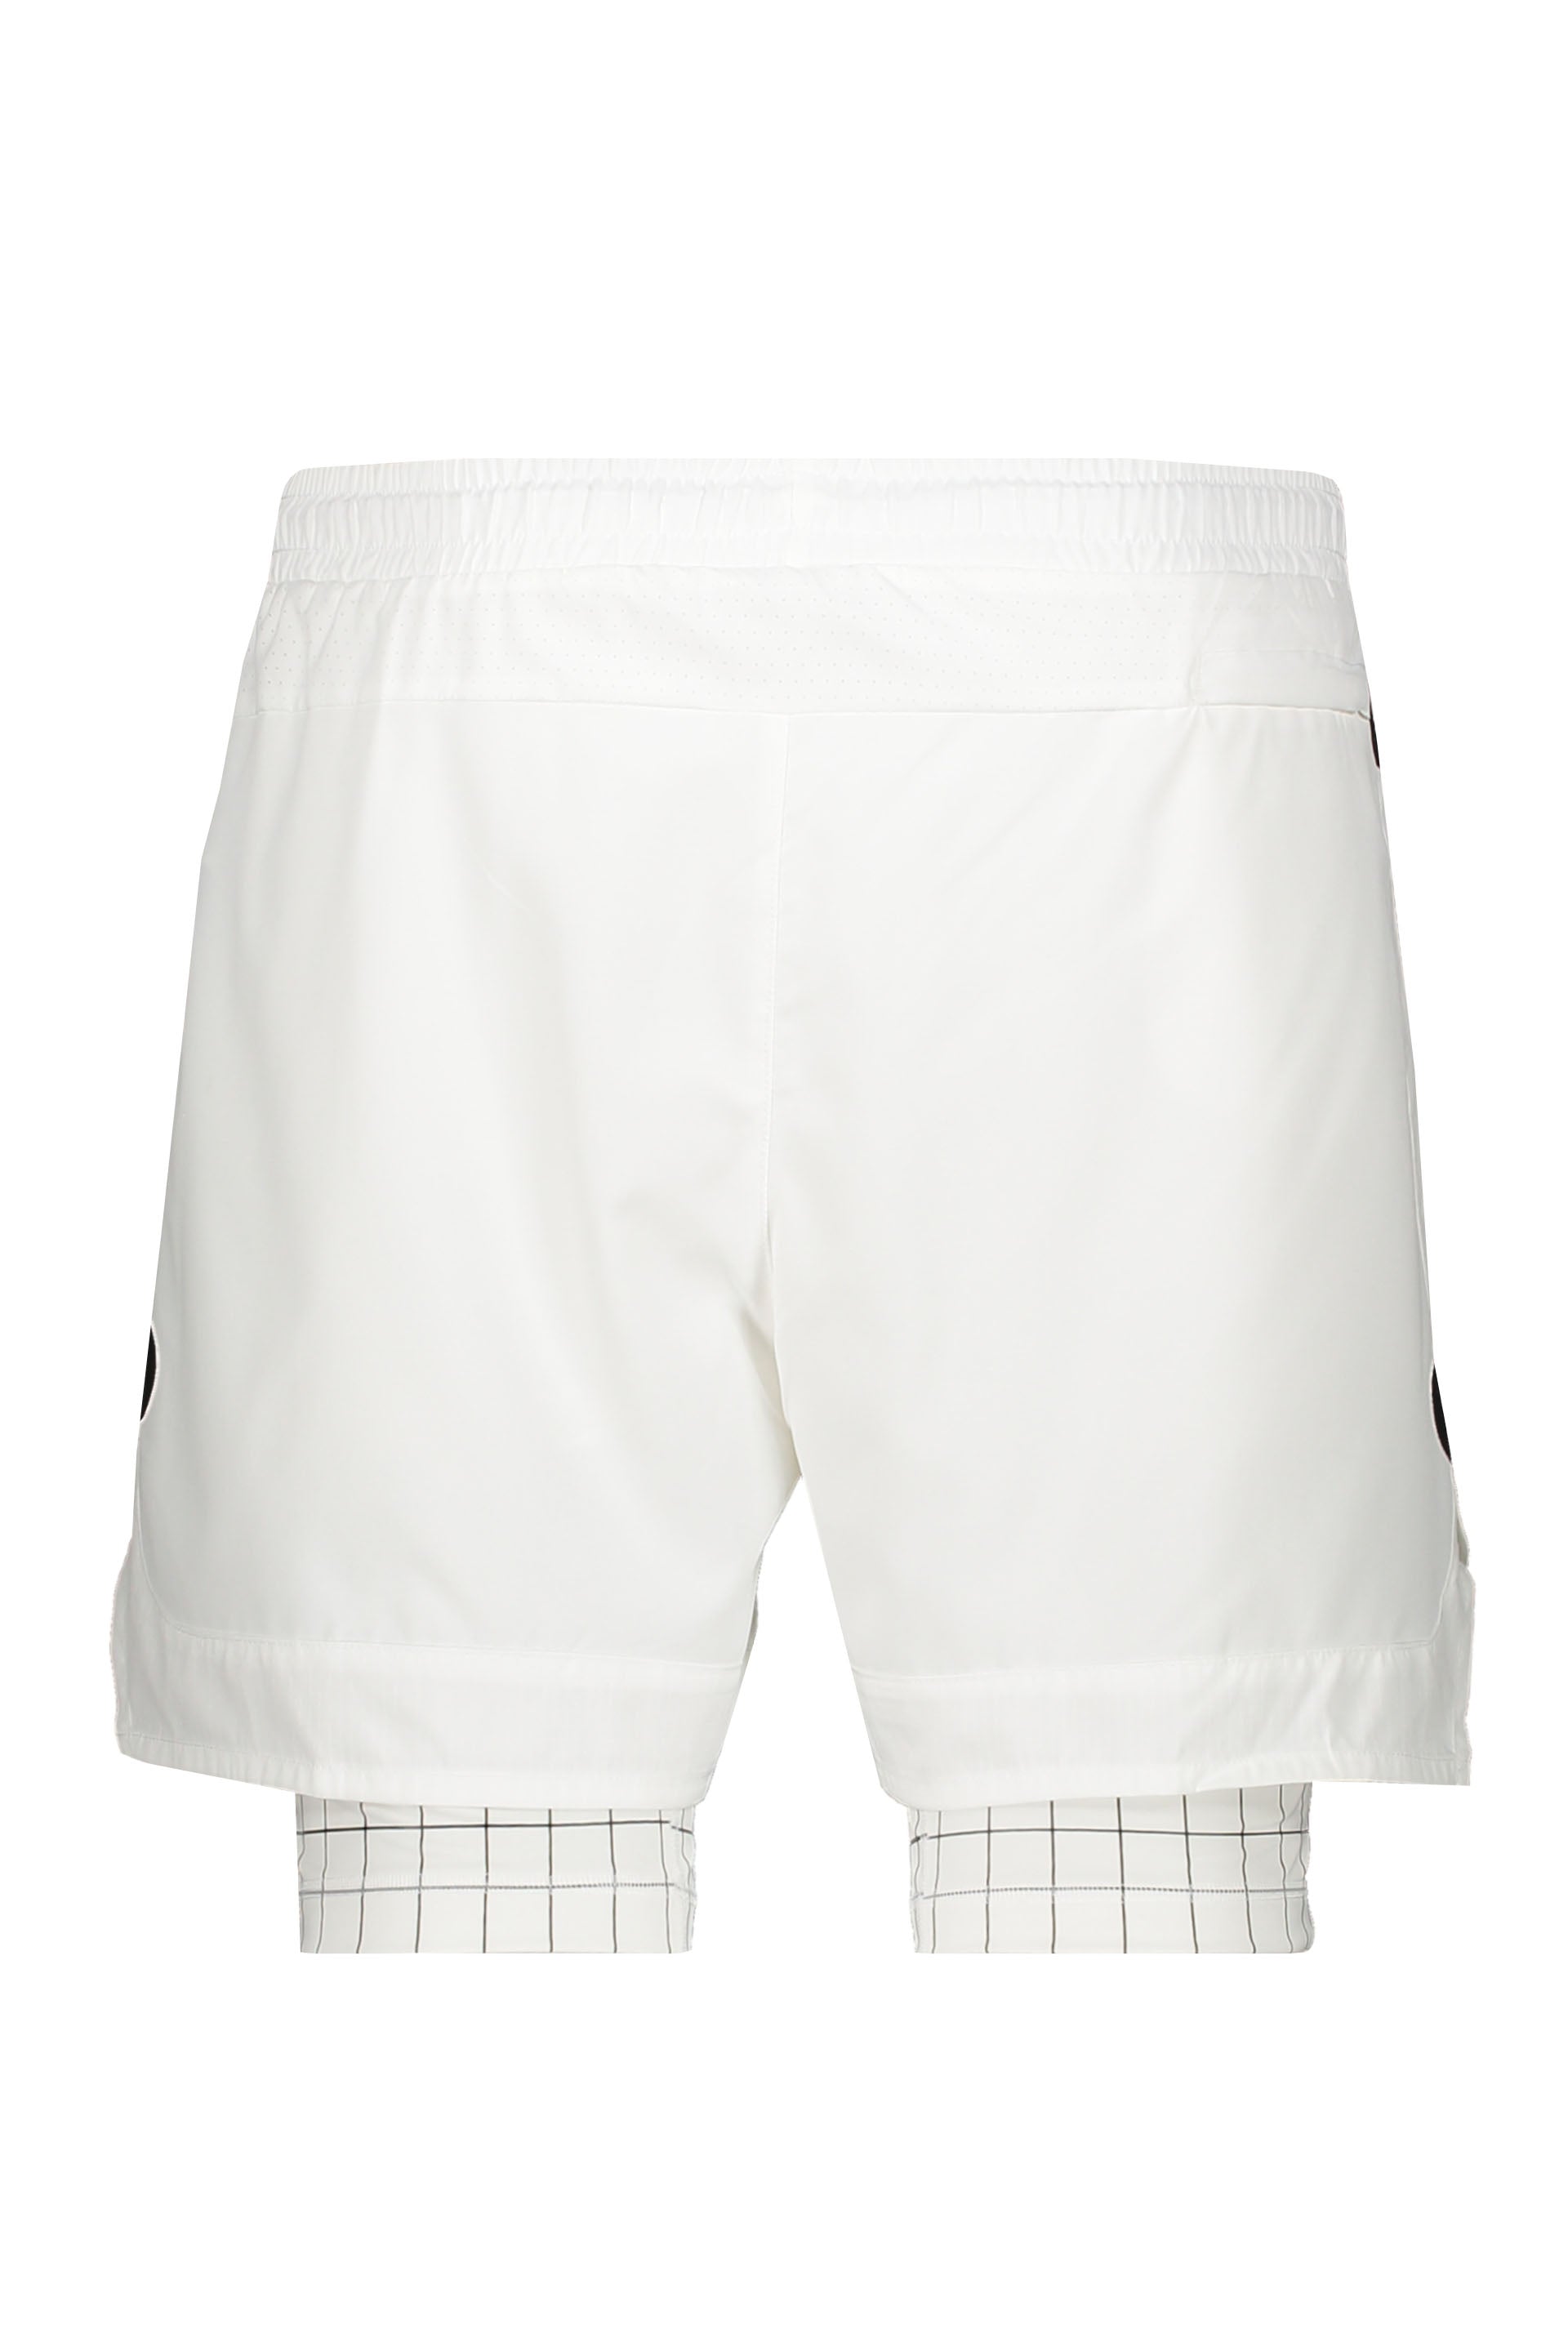 Off-White-OUTLET-SALE-Nike-x-Off-White-Nylon-bermuda-shorts-Hosen-XS-ARCHIVE-COLLECTION-2.jpg